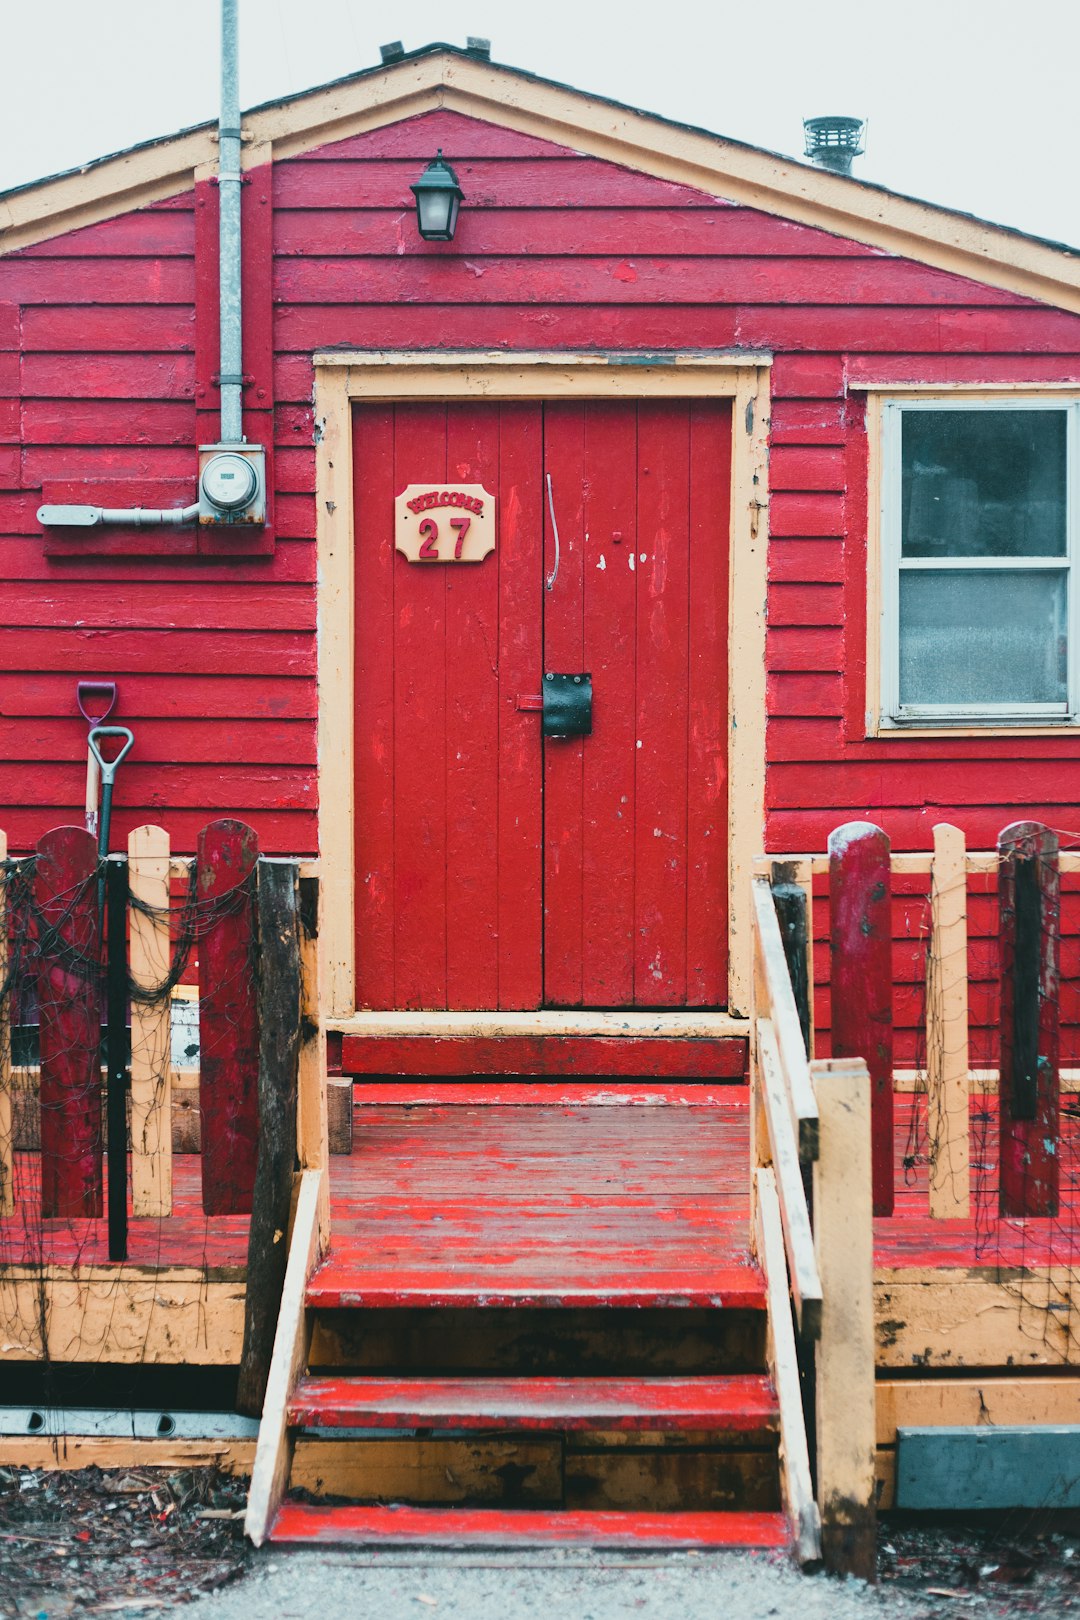 brown wooden ladder leaning on red wooden door